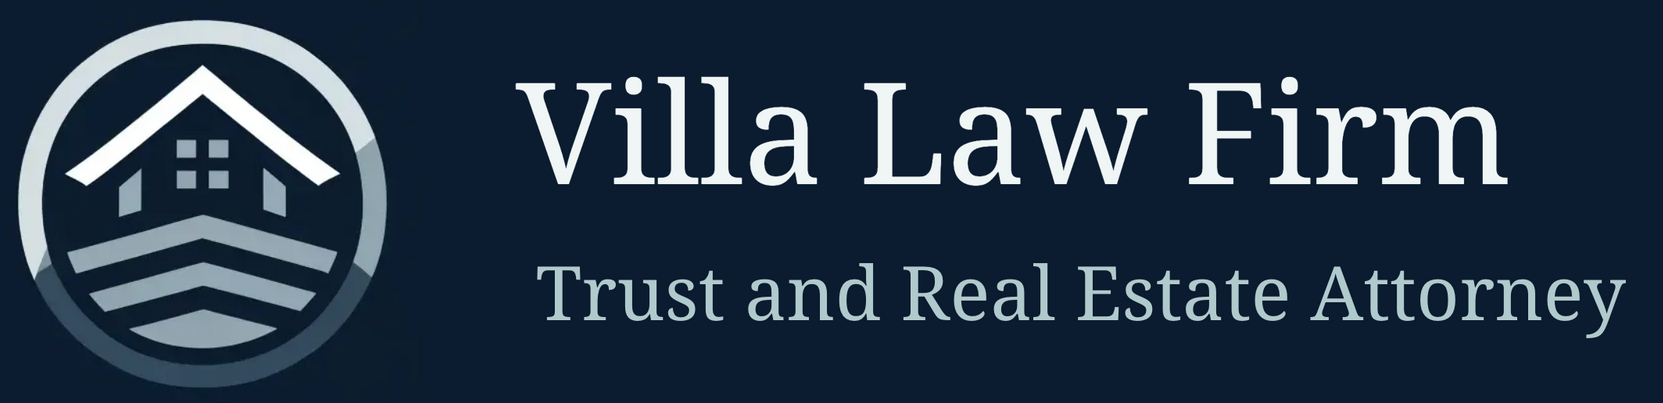 Villa law firm is a trust and real estate attorney